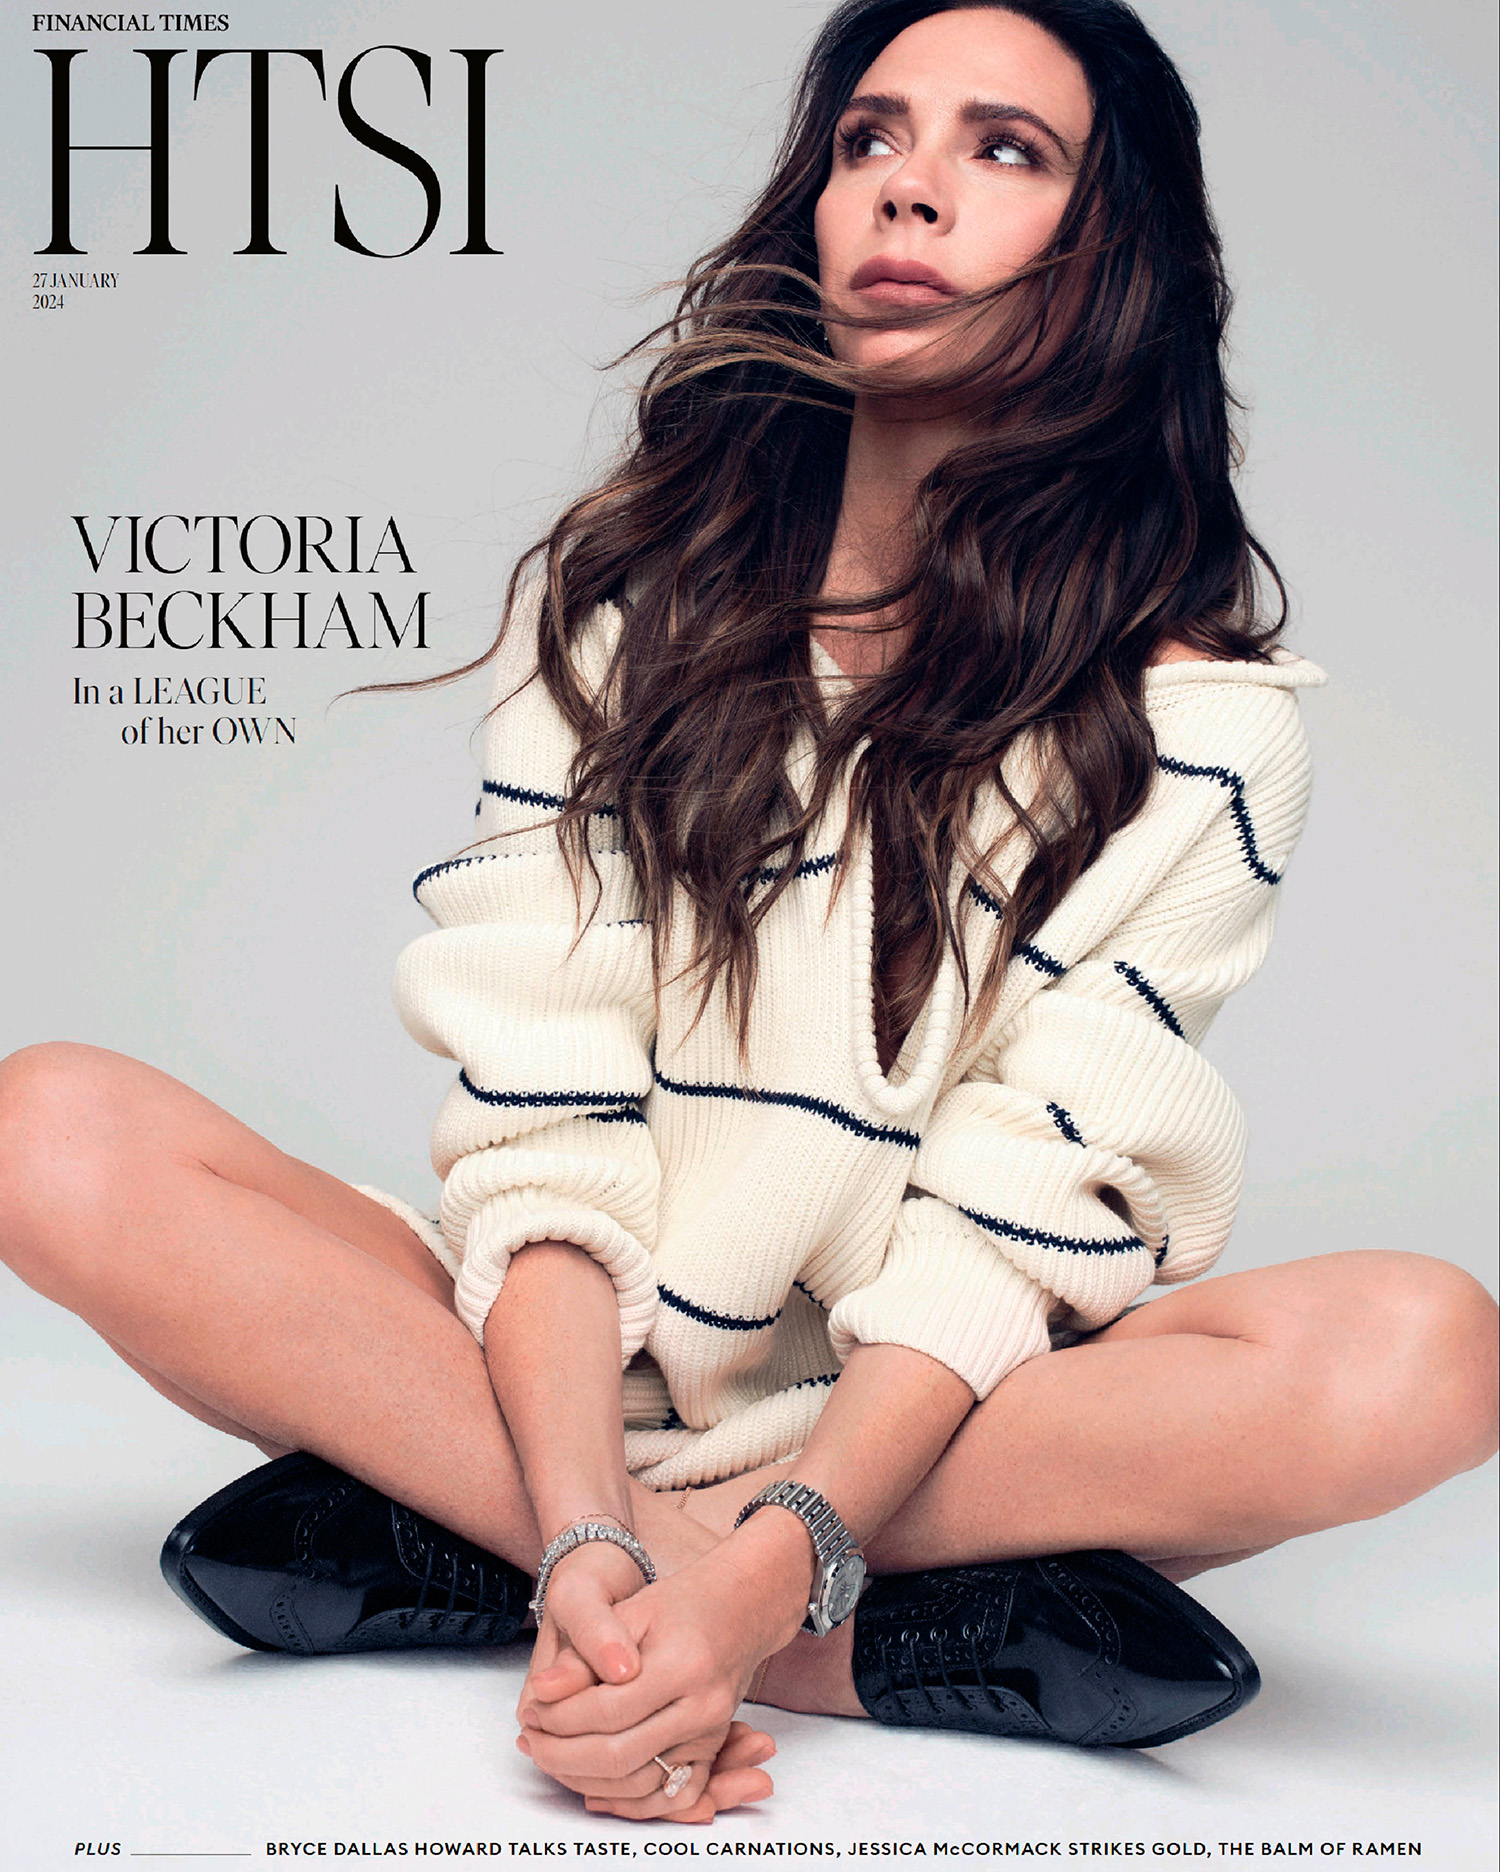 Victoria Beckham covers How To Spend It January 27th, 2024 by Nathaniel Goldberg